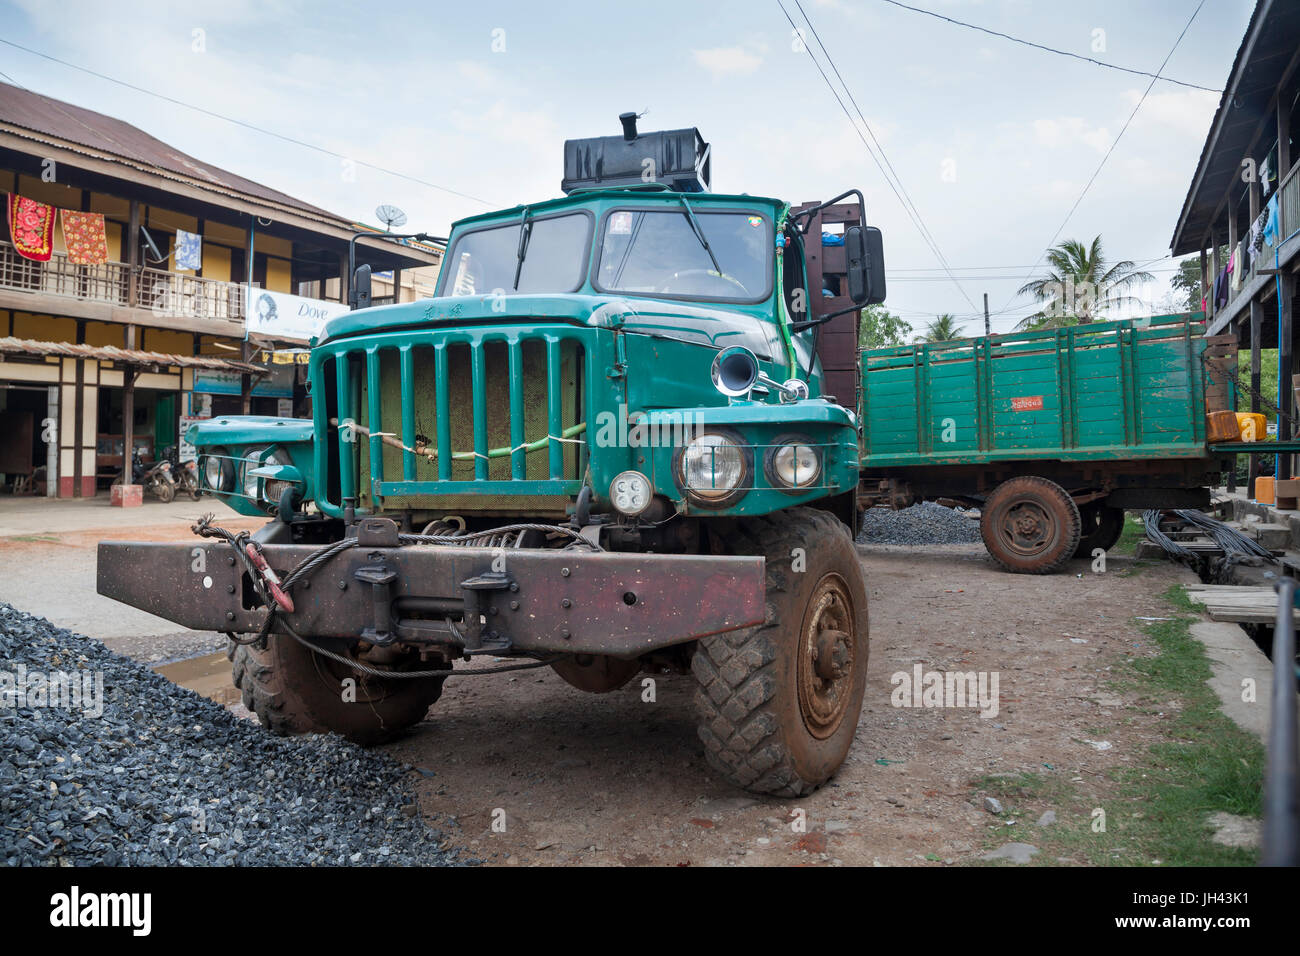 Chinese manufactured cargo truck. Hsipaw, Myanmar Stock Photo